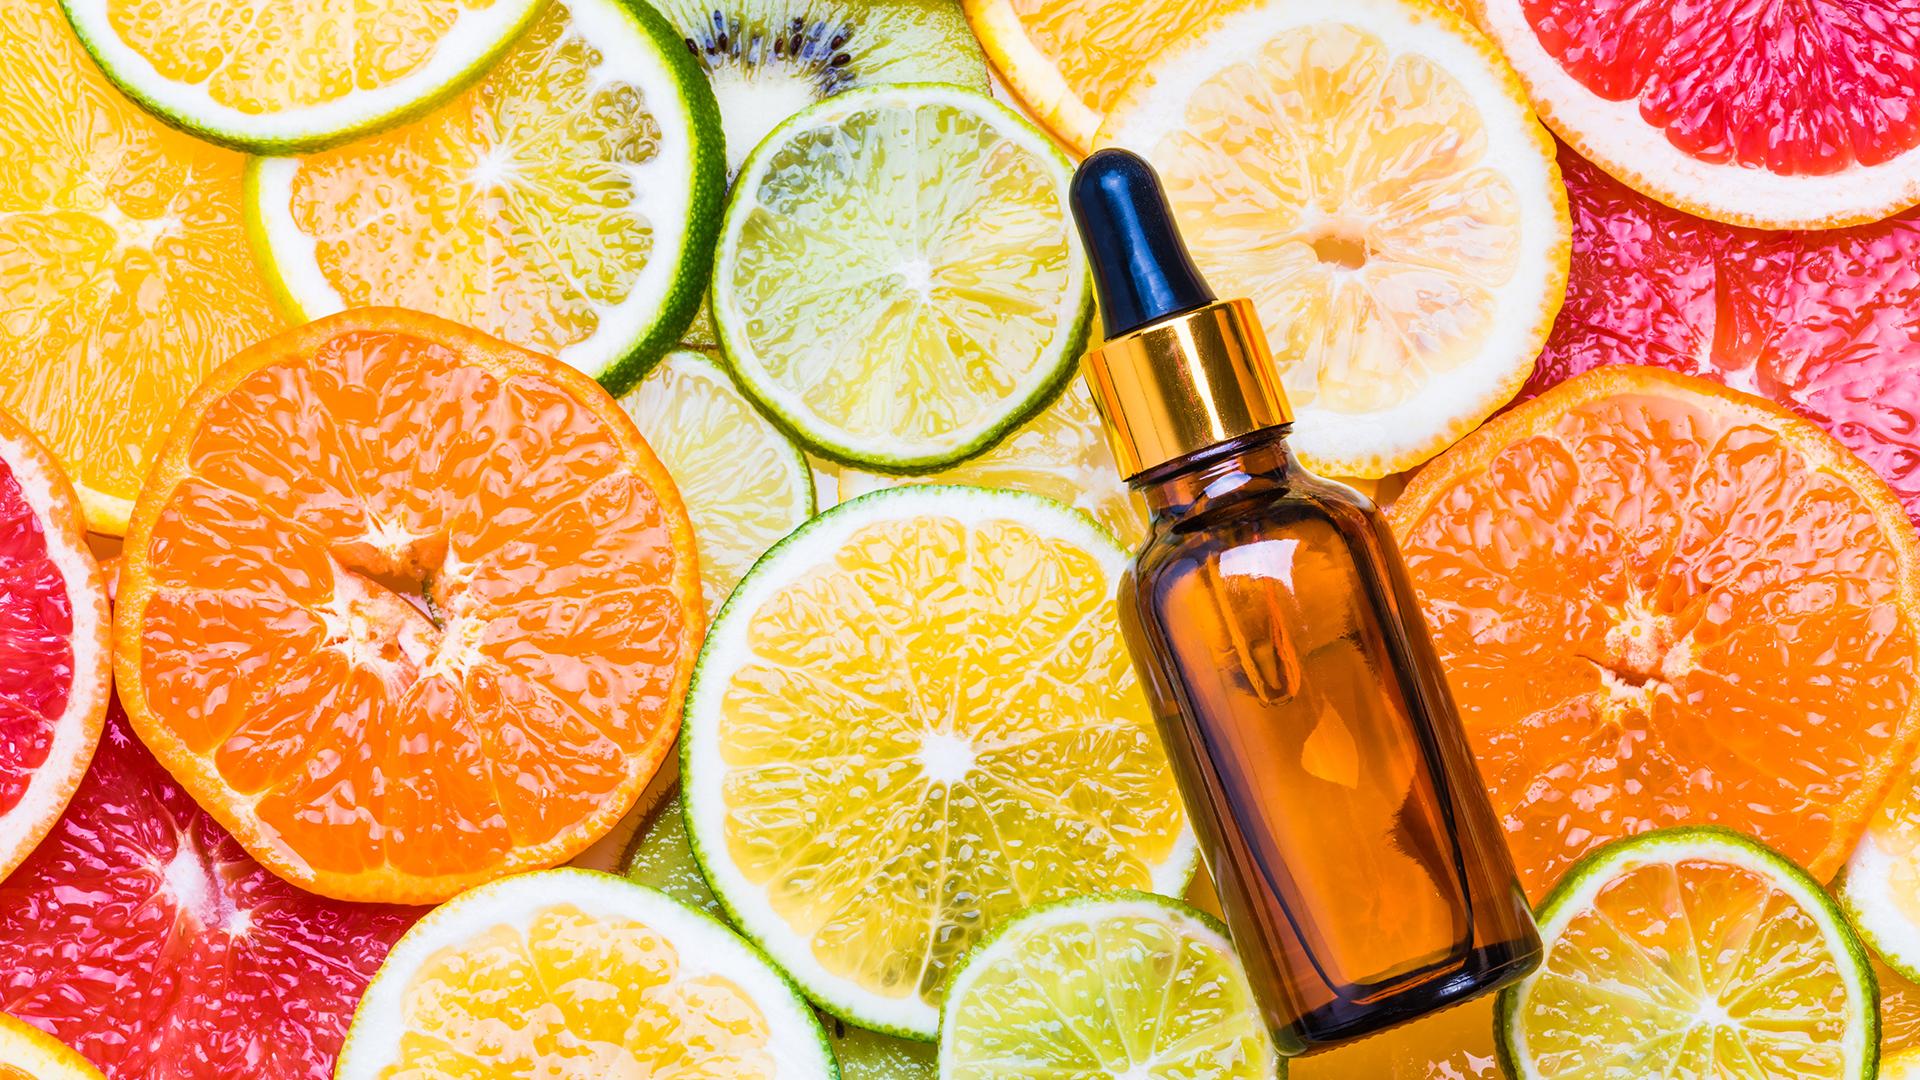 The Best Anti Aging Ingredients According To A Doctor